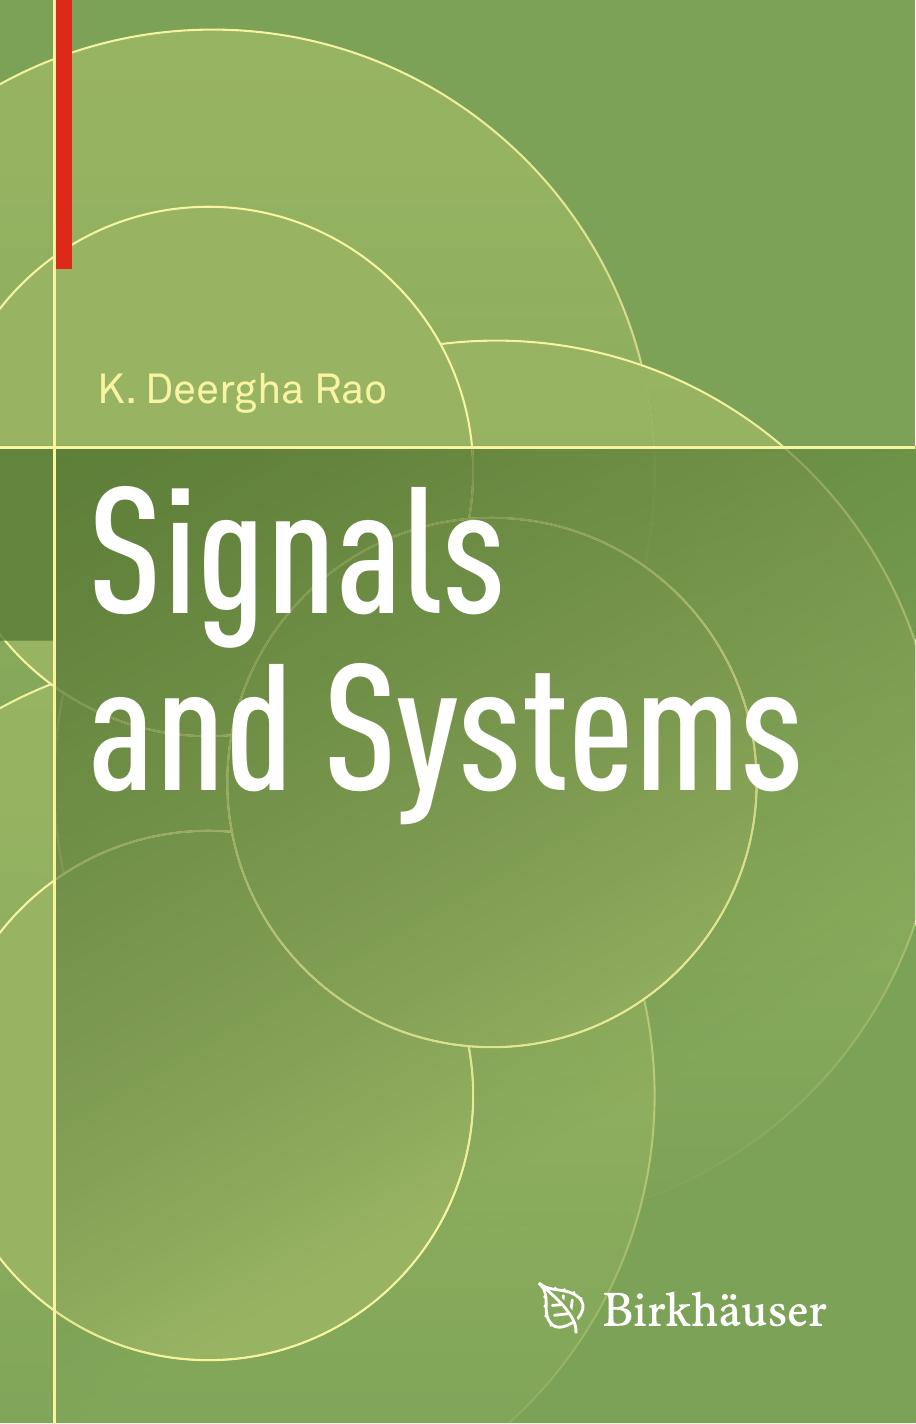 Signals and Systems 2018